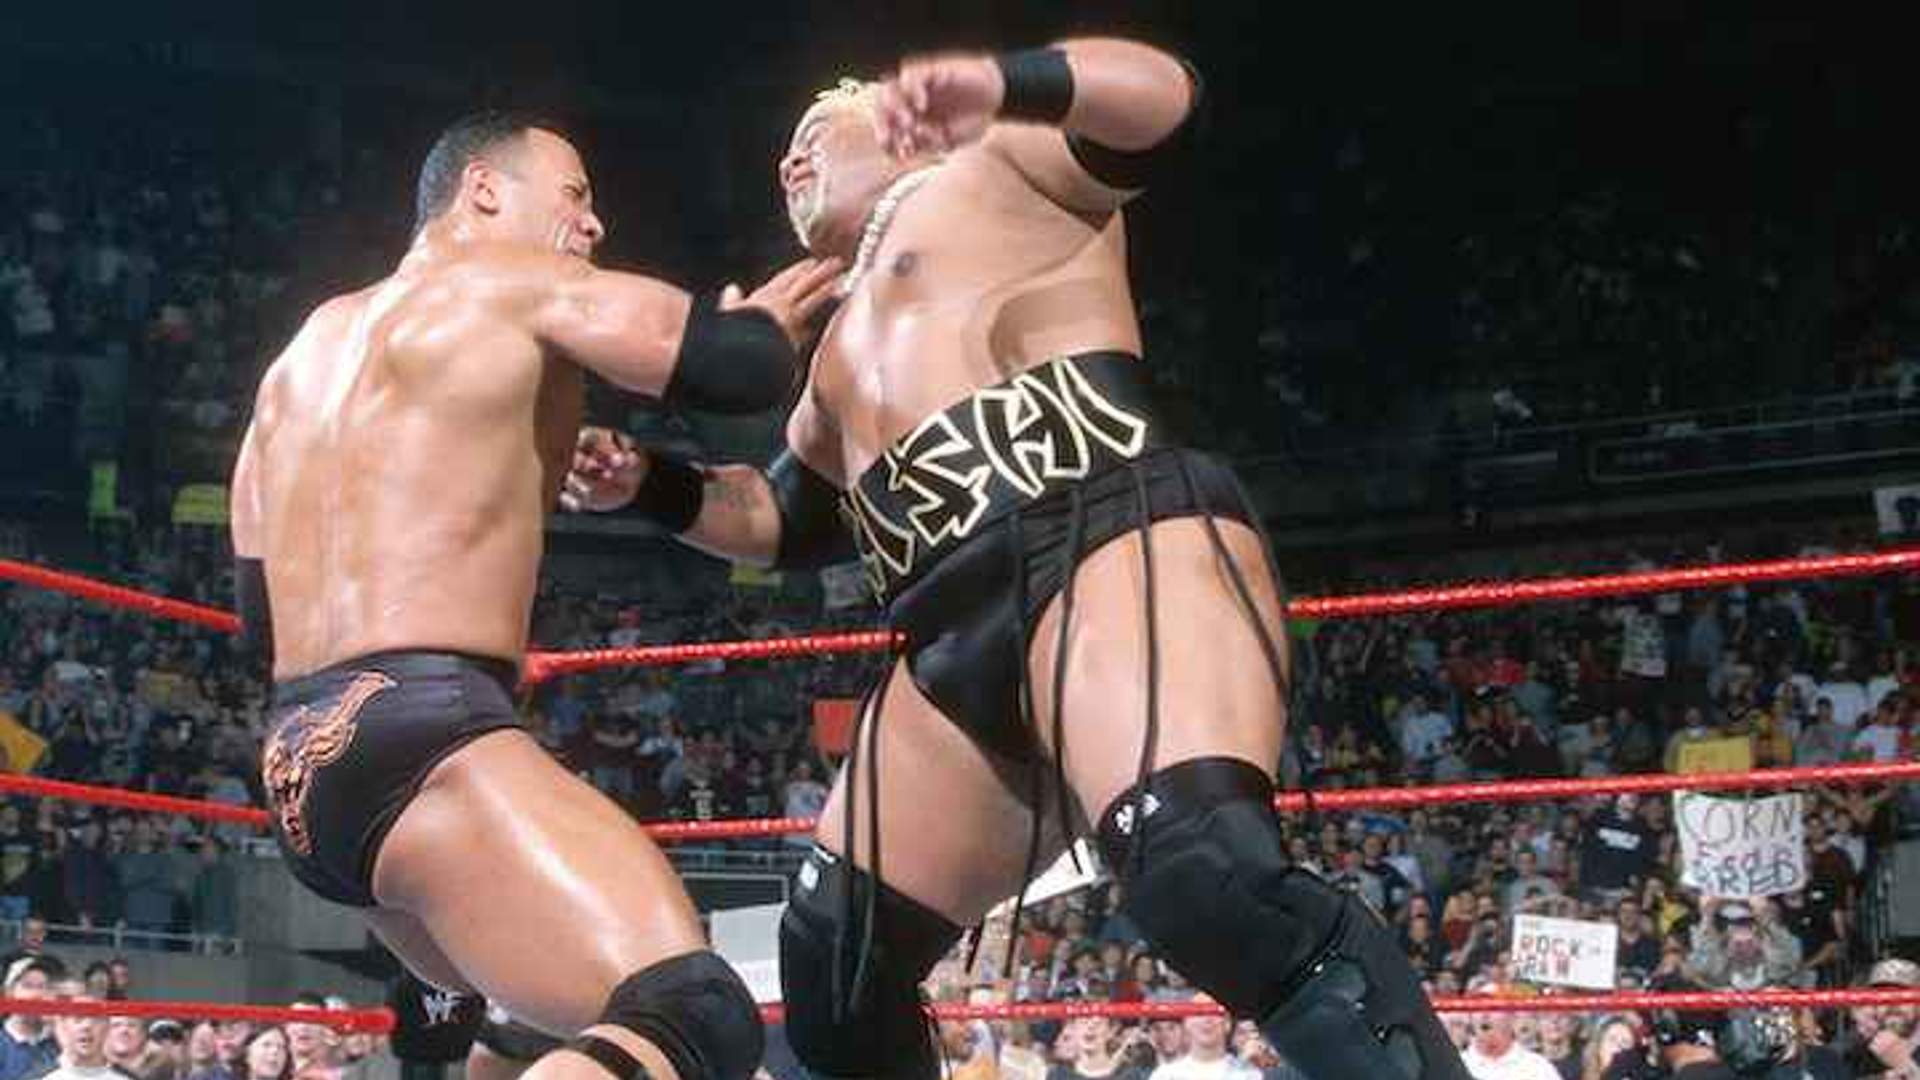 Rikishi vs The Rock and other rivalries in WWE.